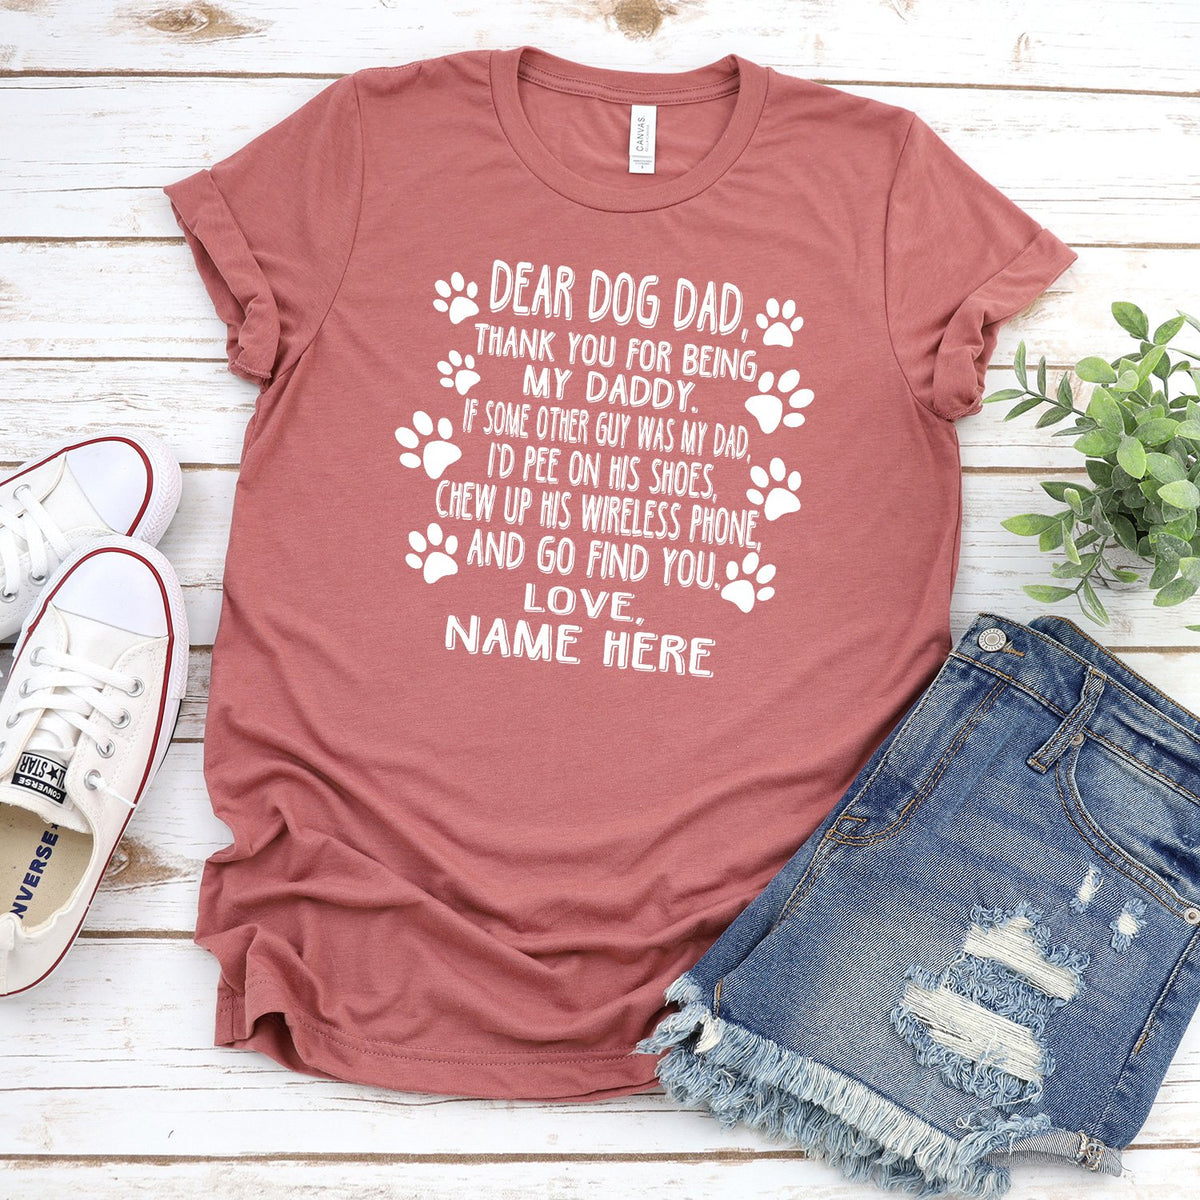 Dear Dog Dad Thank You For Being My Daddy - Short Sleeve Tee Shirt